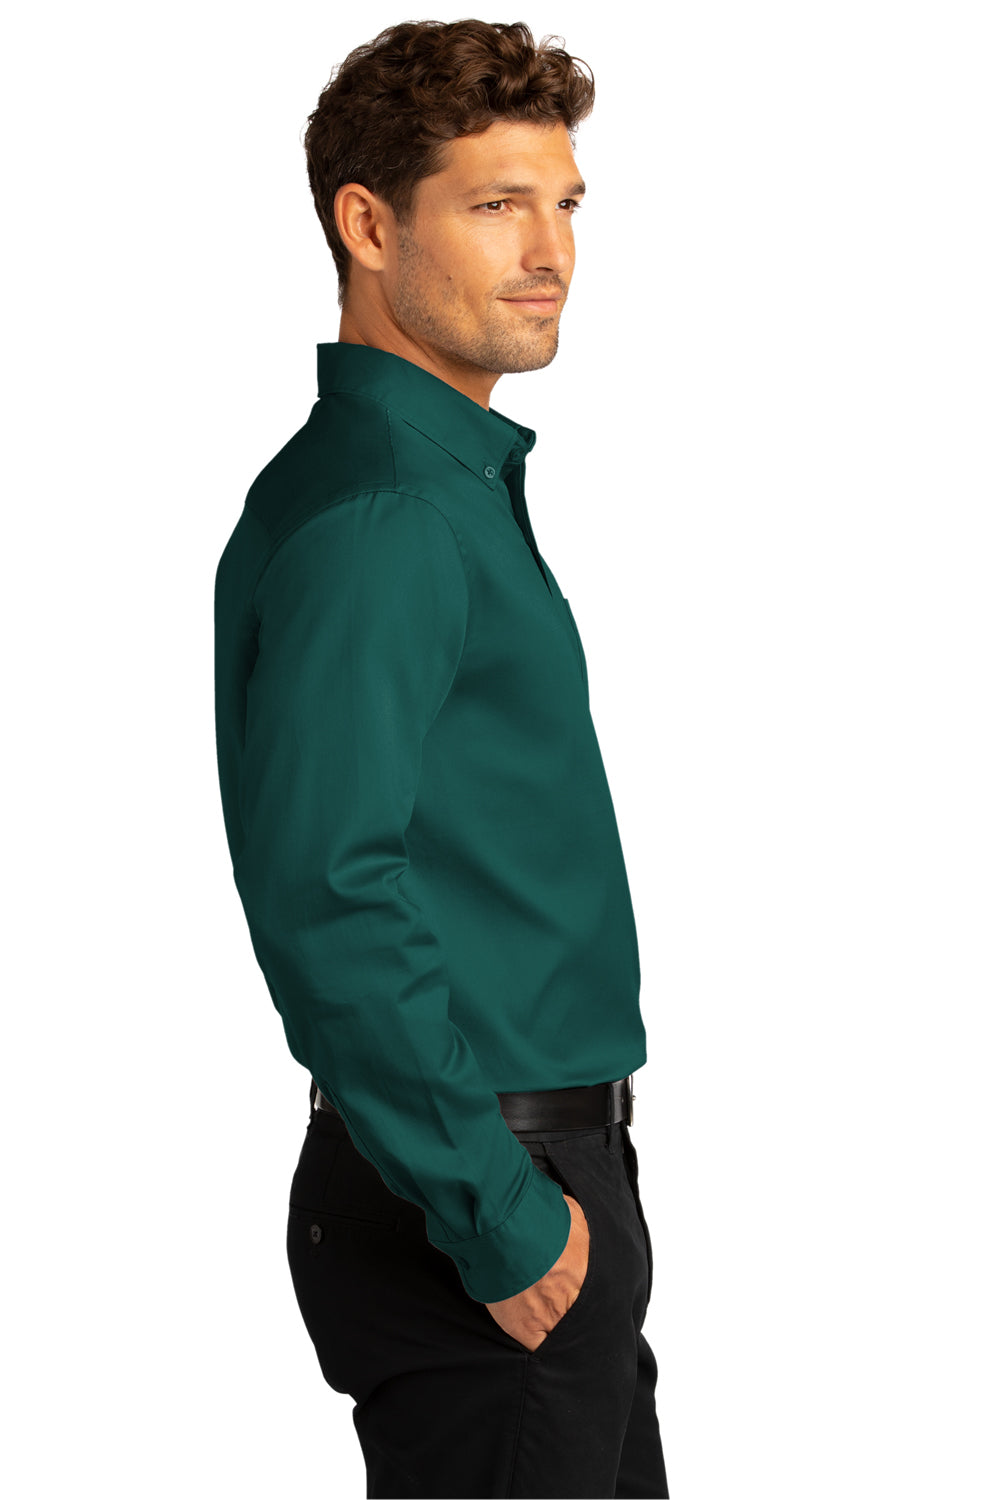 Port Authority Mens SuperPro Wrinkle Resistant React Long Sleeve Button Down Shirt w/ Pocket Marine Green Side